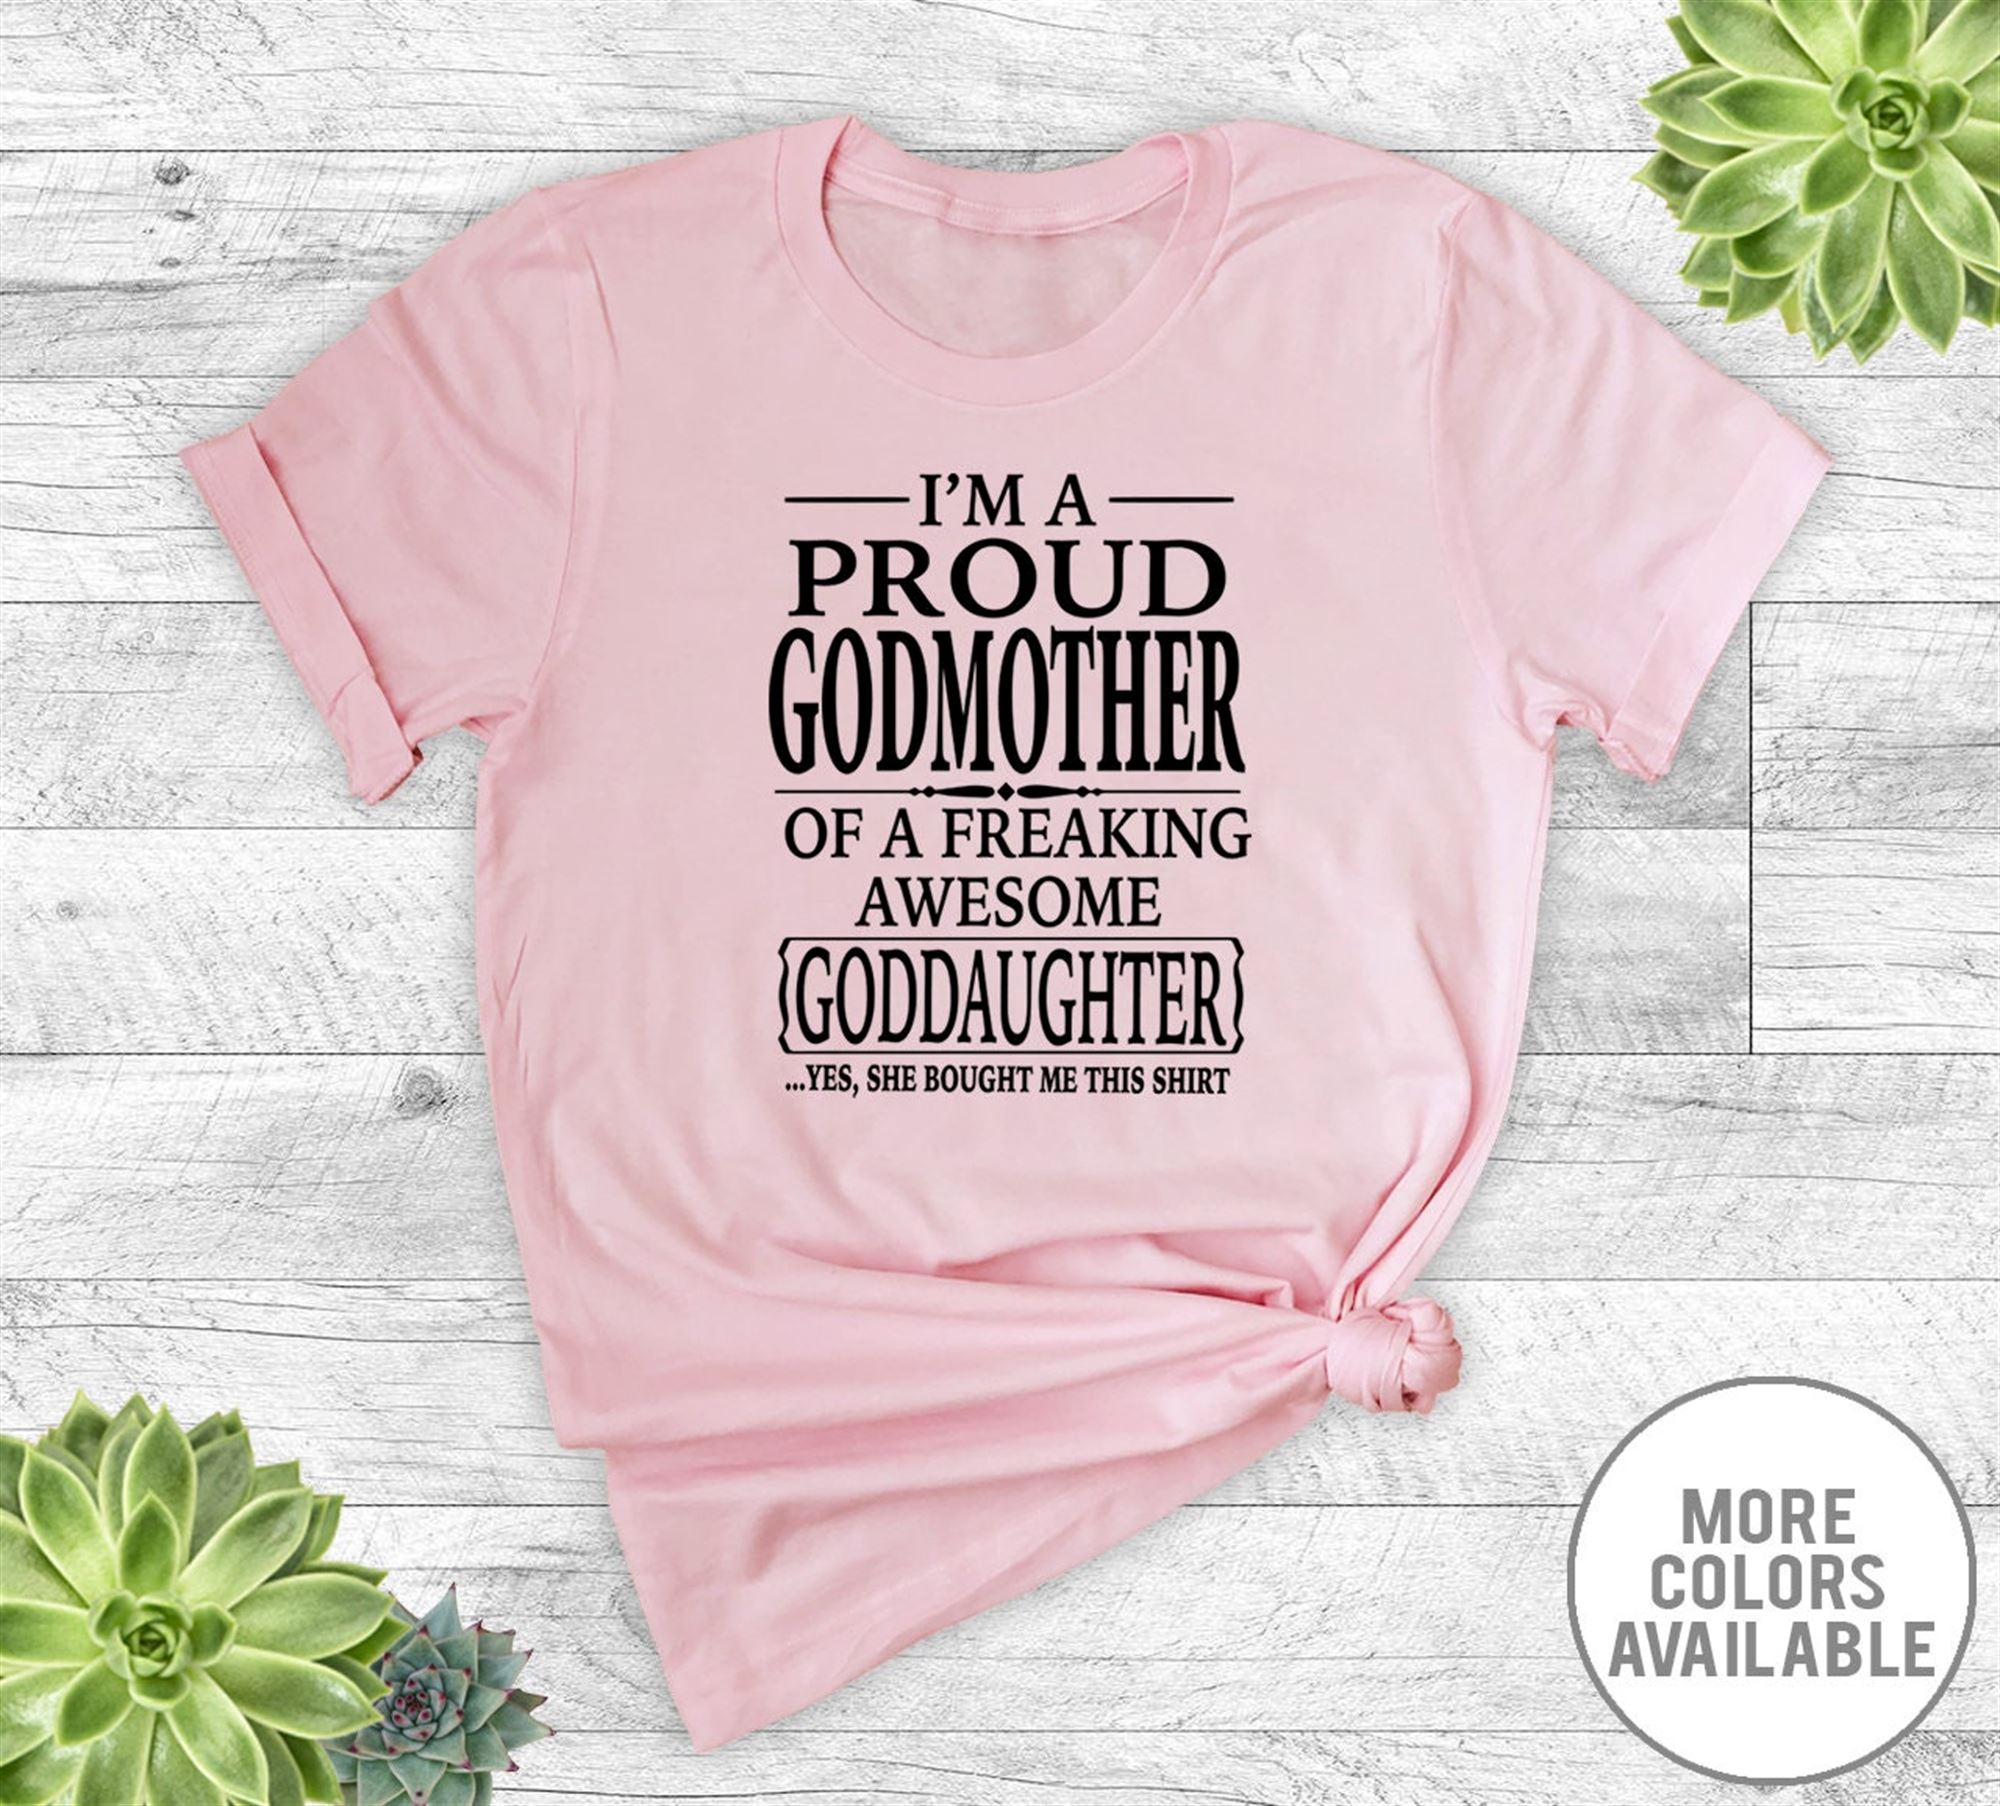 Great I'm A Proud Godmother Of A Freaking Awesome Goddaughter - Unisex T-shirt - Godmother Shirt - Godmother Gift 